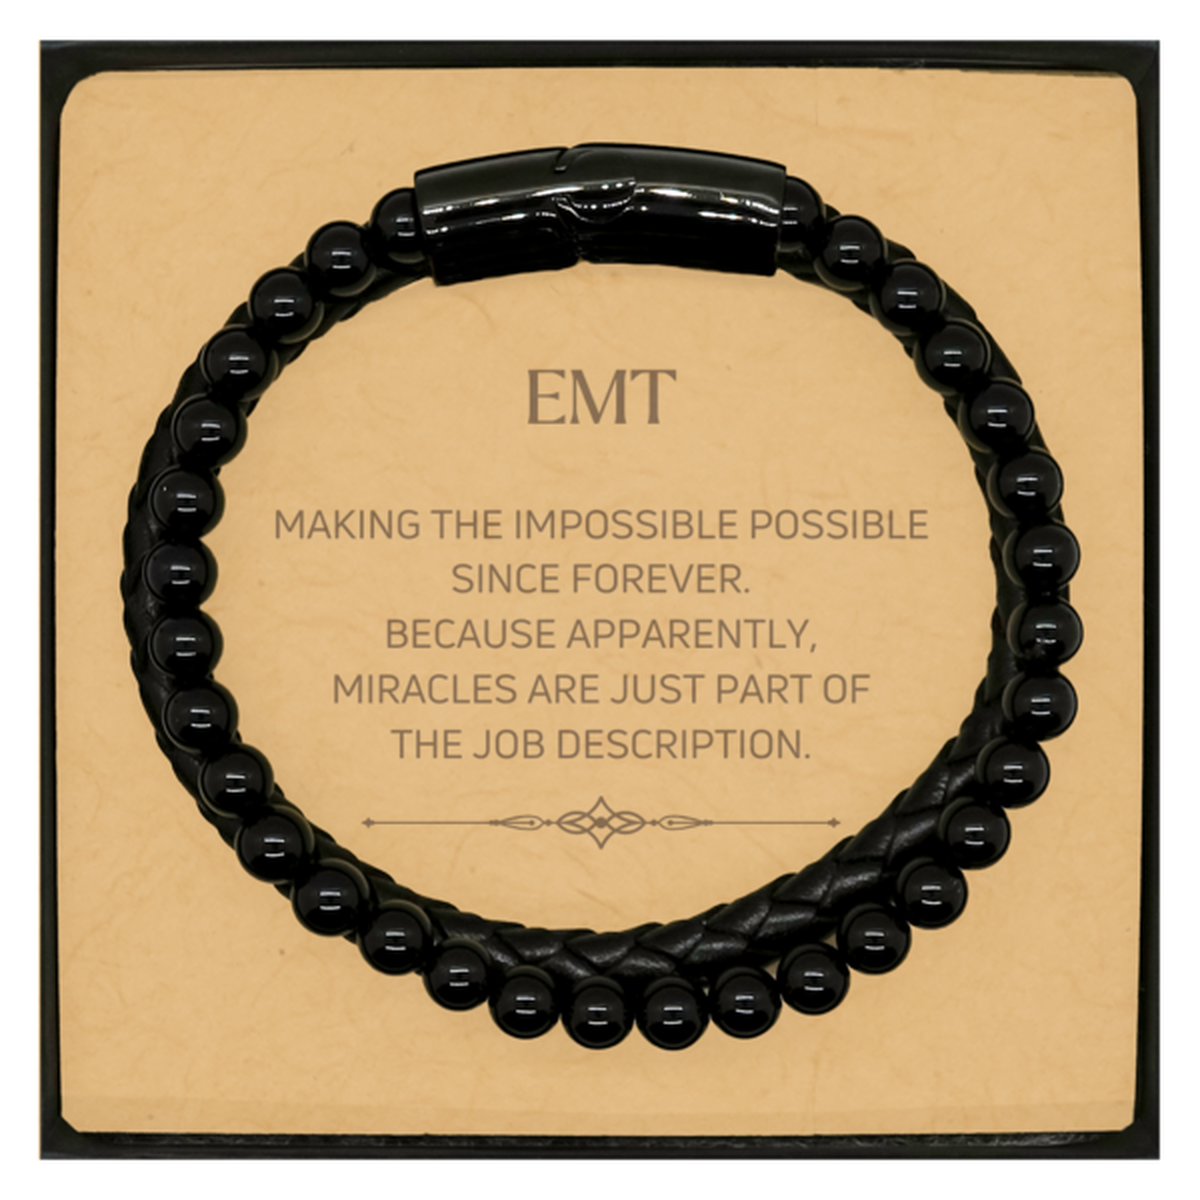 Funny EMT Gifts, Miracles are just part of the job description, Inspirational Birthday Christmas Stone Leather Bracelets For EMT, Men, Women, Coworkers, Friends, Boss